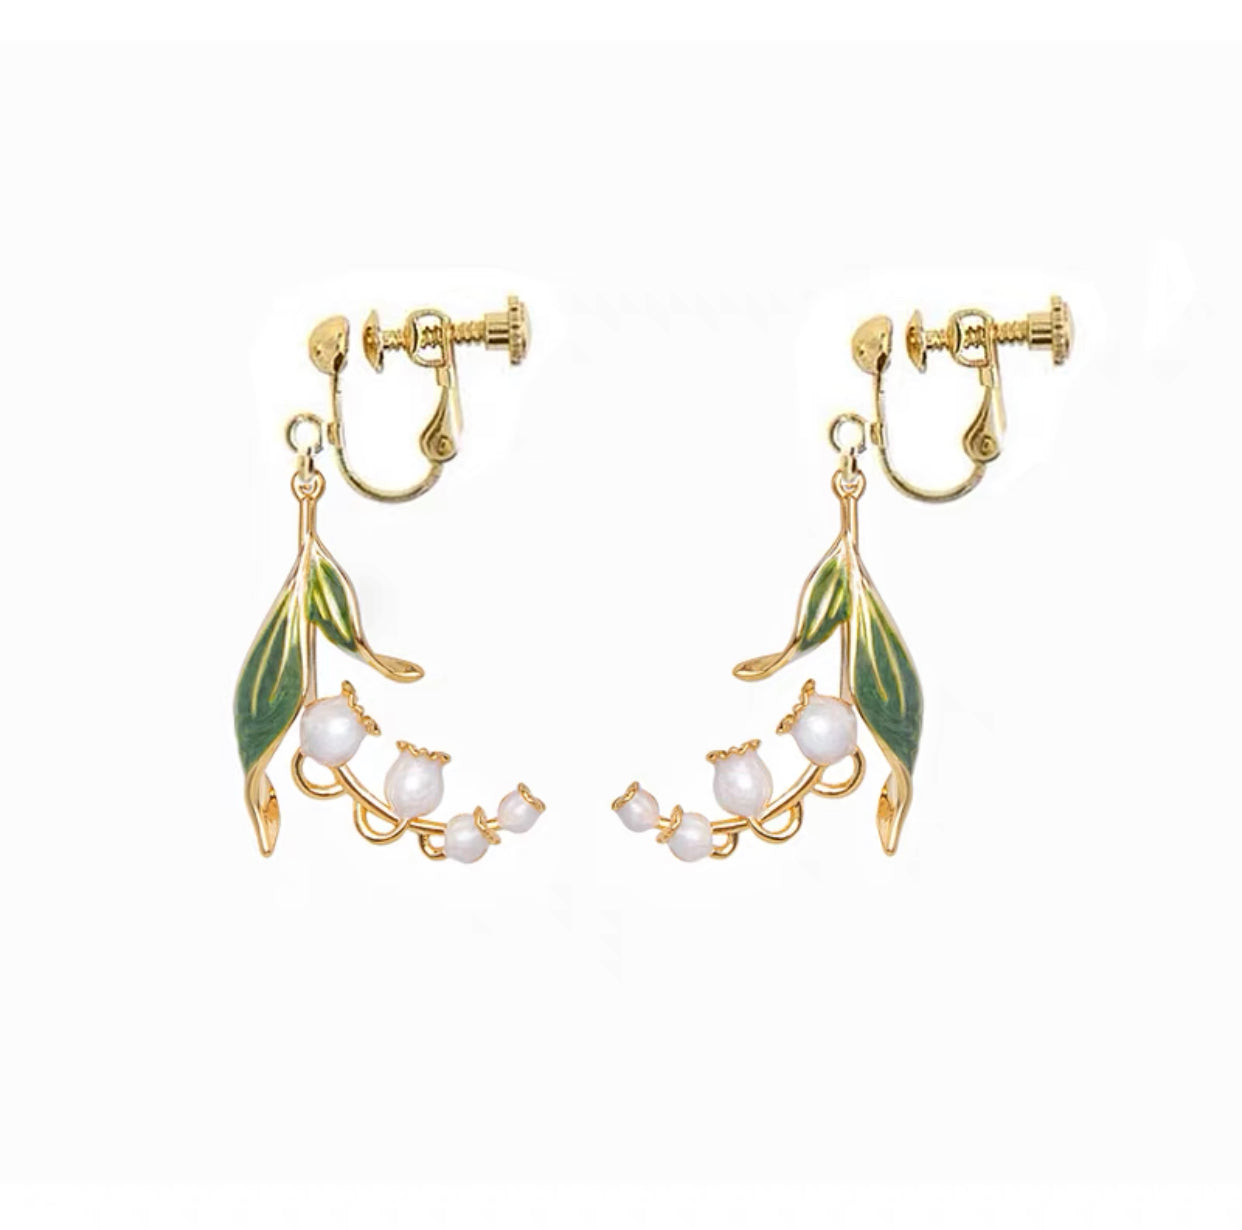 Lily Of The Valley Handmade Earrings-Style 2